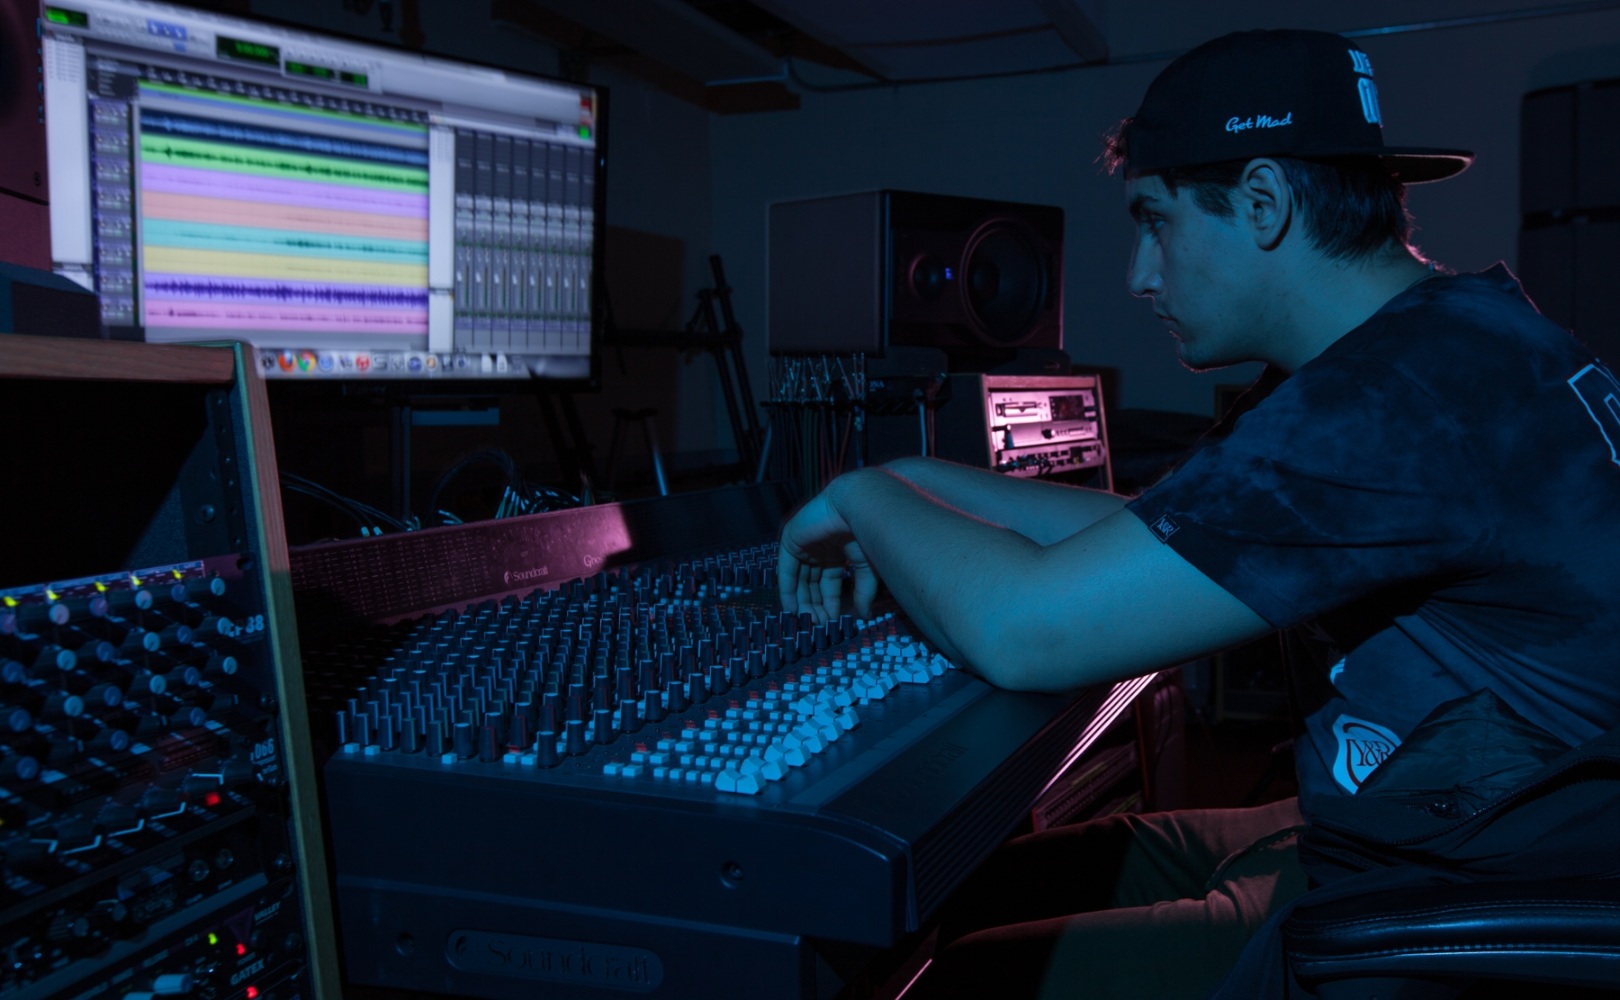 10 Best Music Production Schools In New York